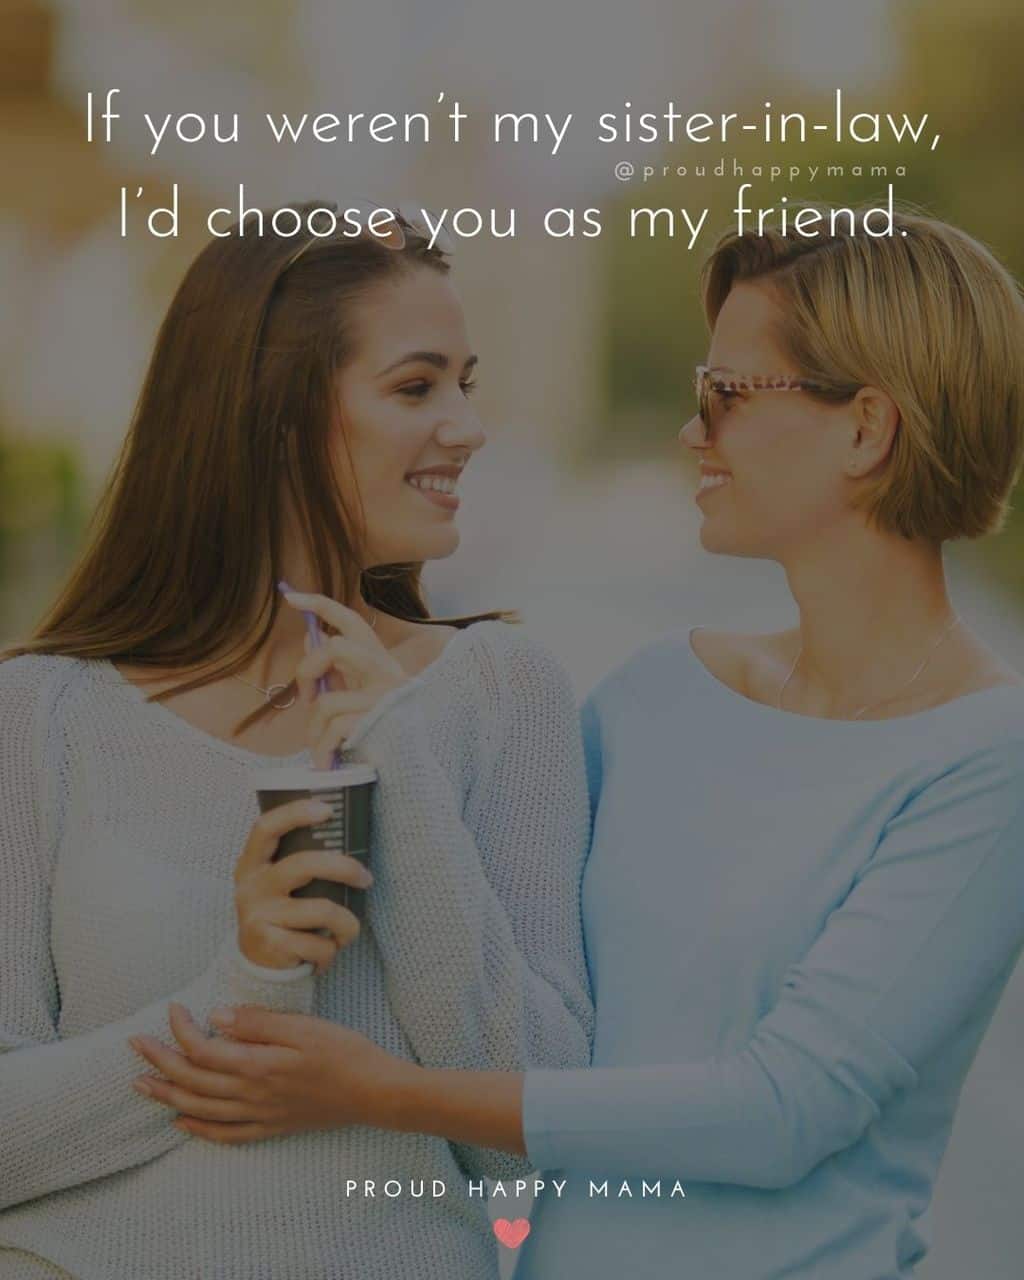 50+ BEST Sister In Law Quotes And Sayings [With Images]